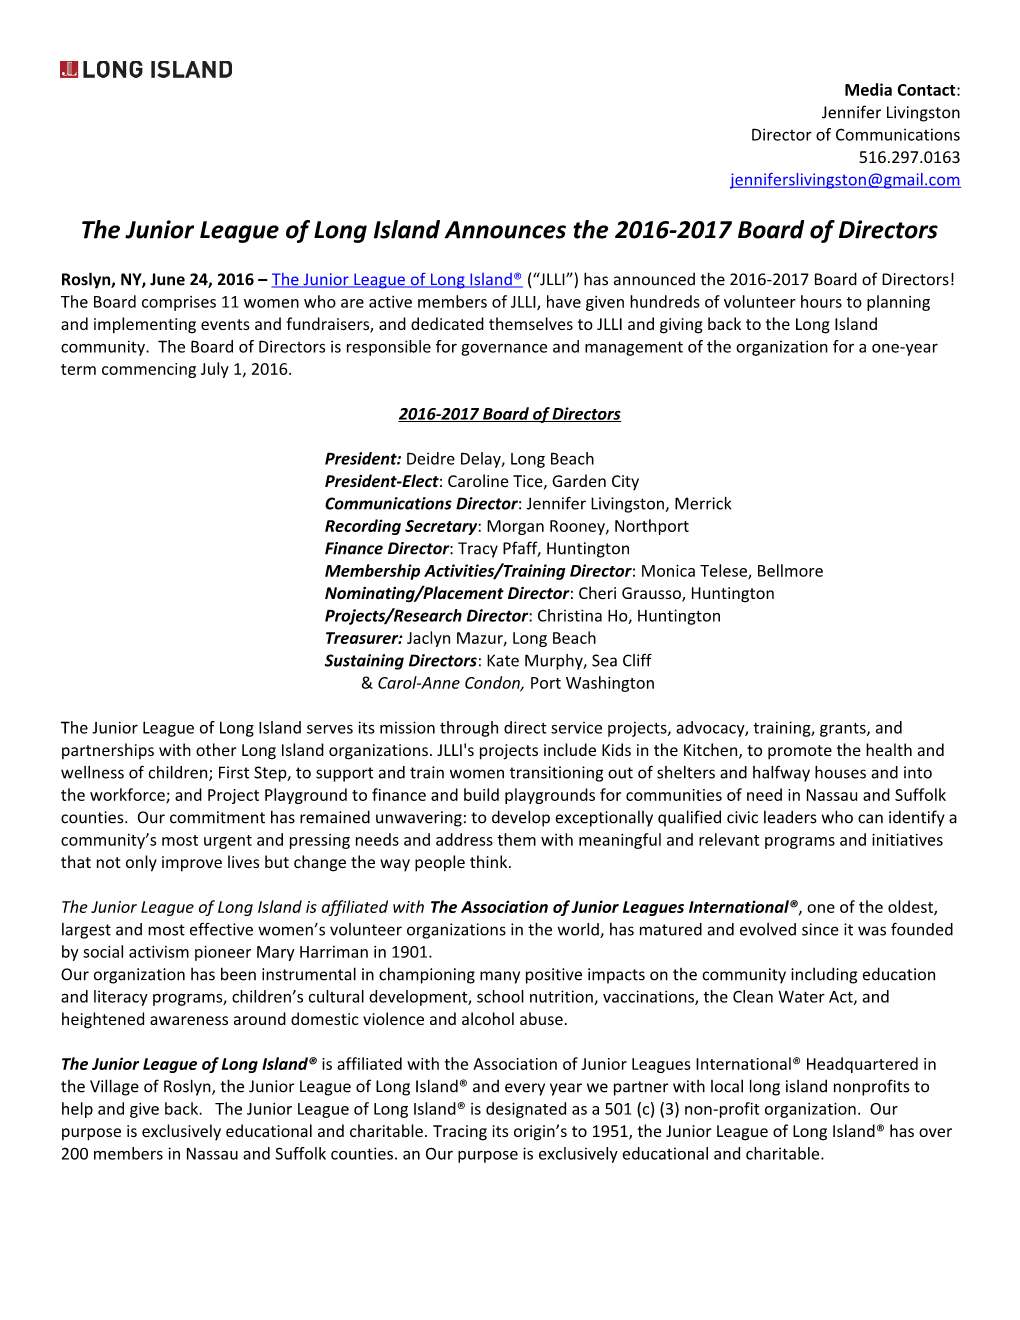 The Junior League of Long Island Announces the 2016-2017 Board of Directors